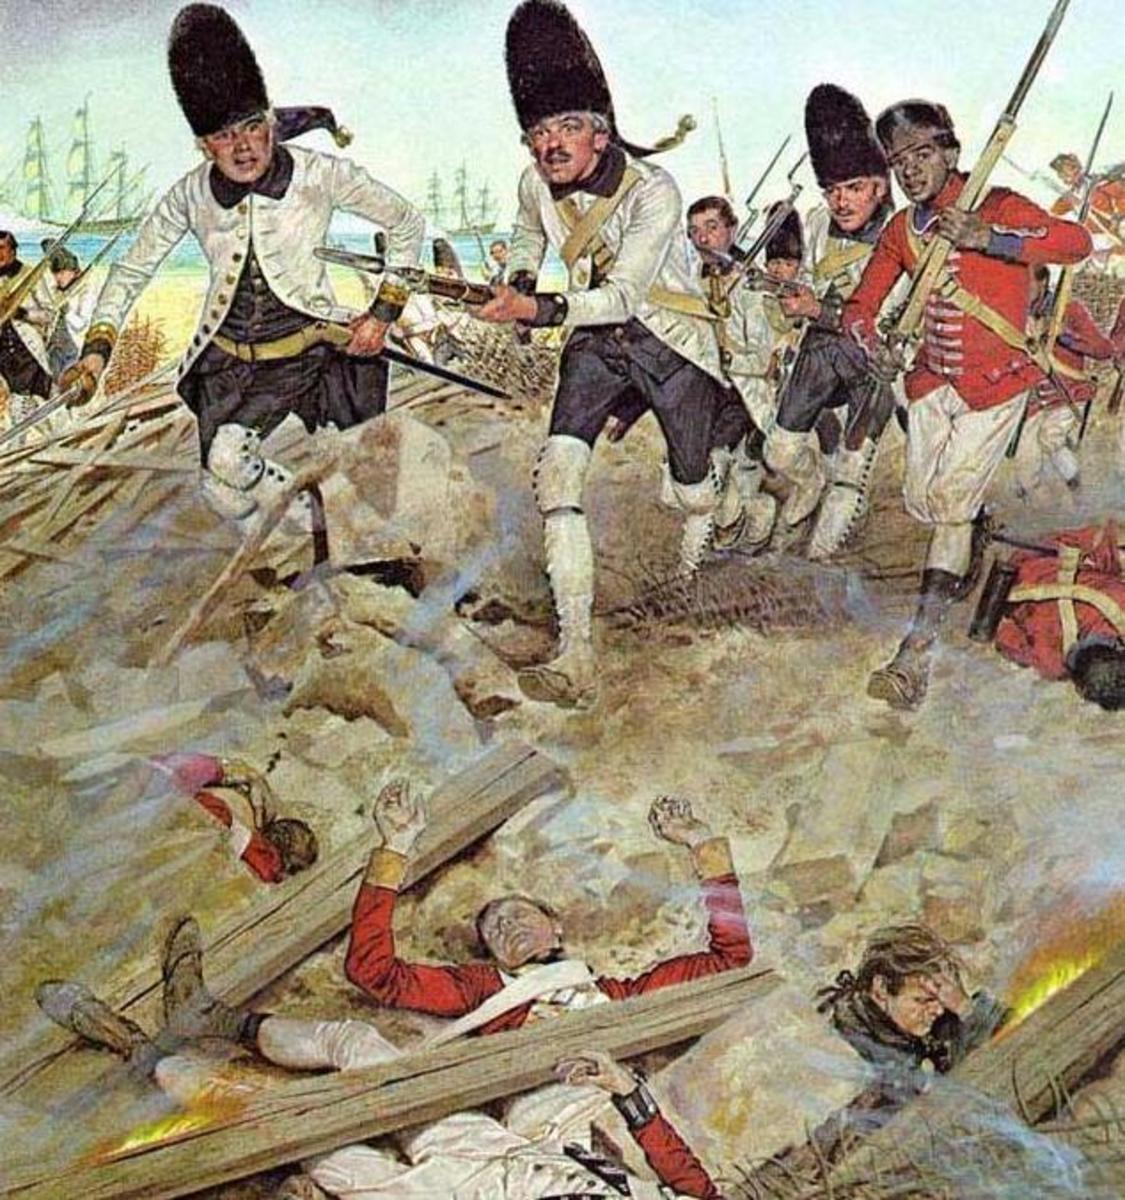 Spanish Troops attacking Ft. George in Pensacola, Florida during Revolution